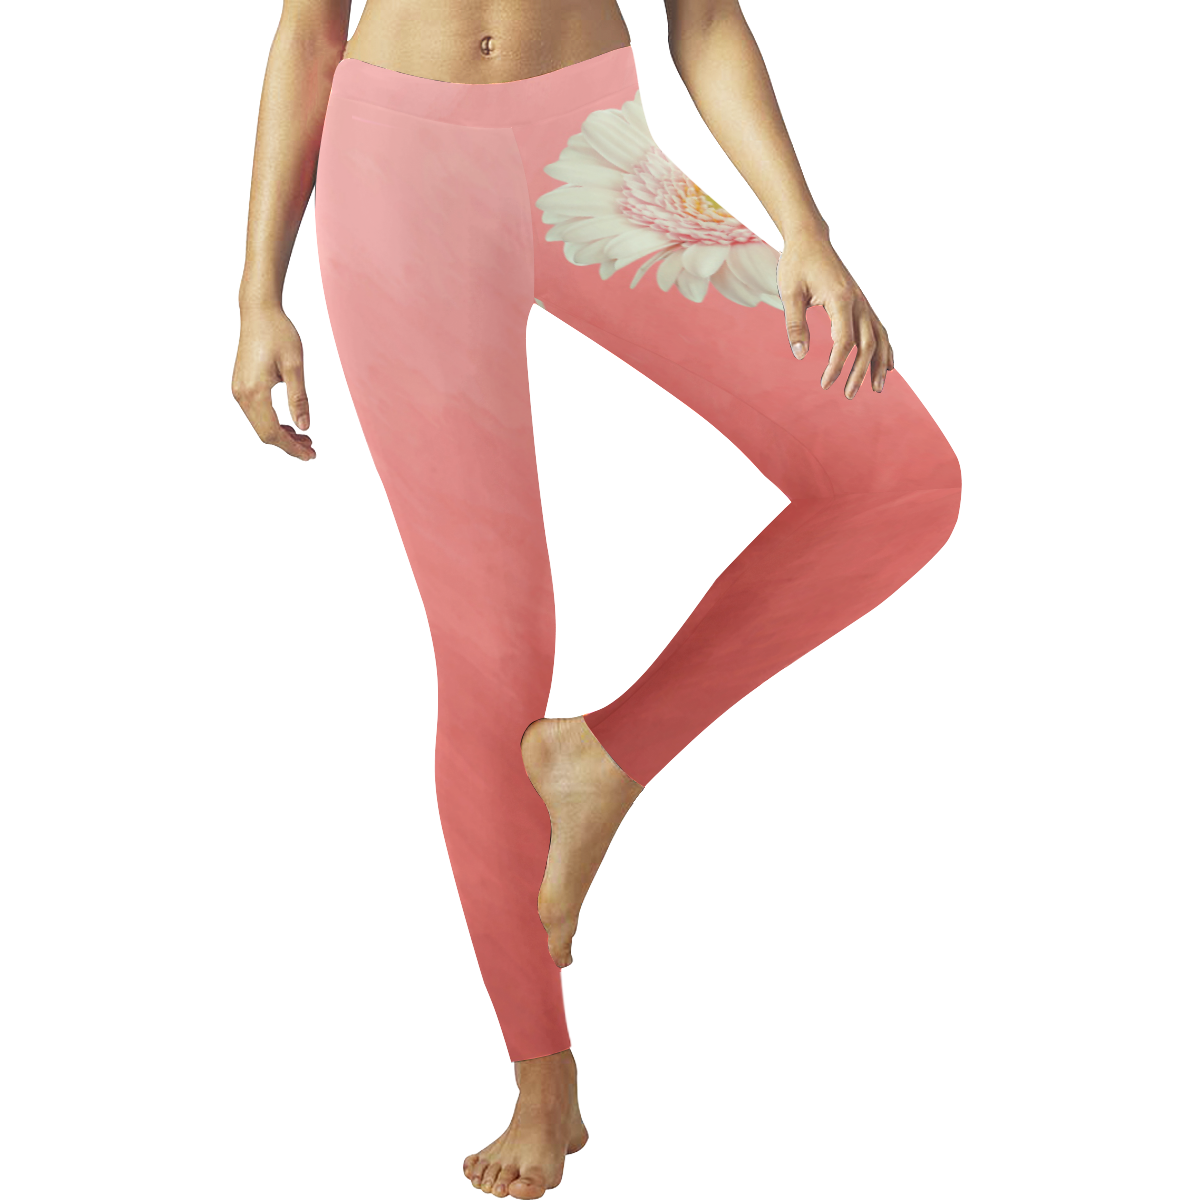 Gerbera Daisy - White Flower on Coral Pink Women's Low Rise Leggings (Invisible Stitch) (Model L05)